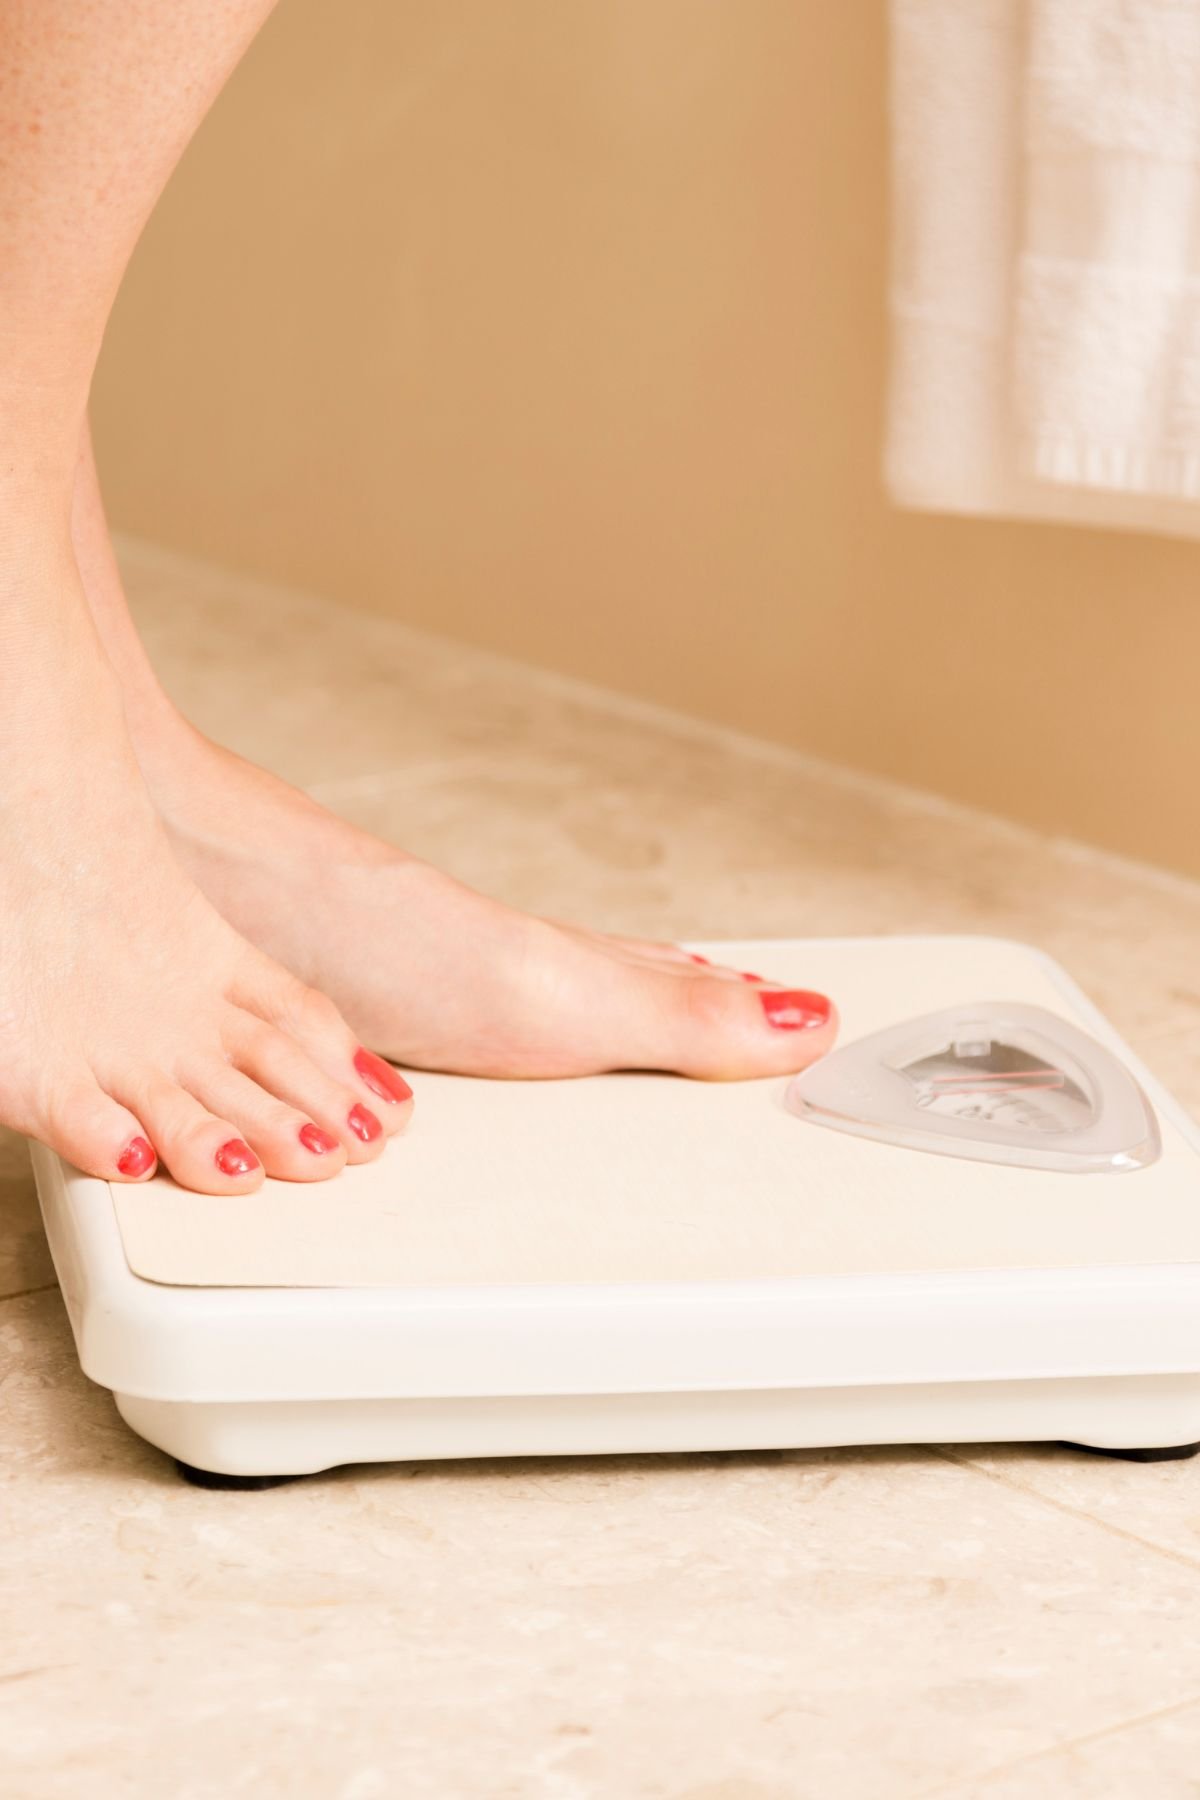 Stepping on a scale with fear of weight gain.